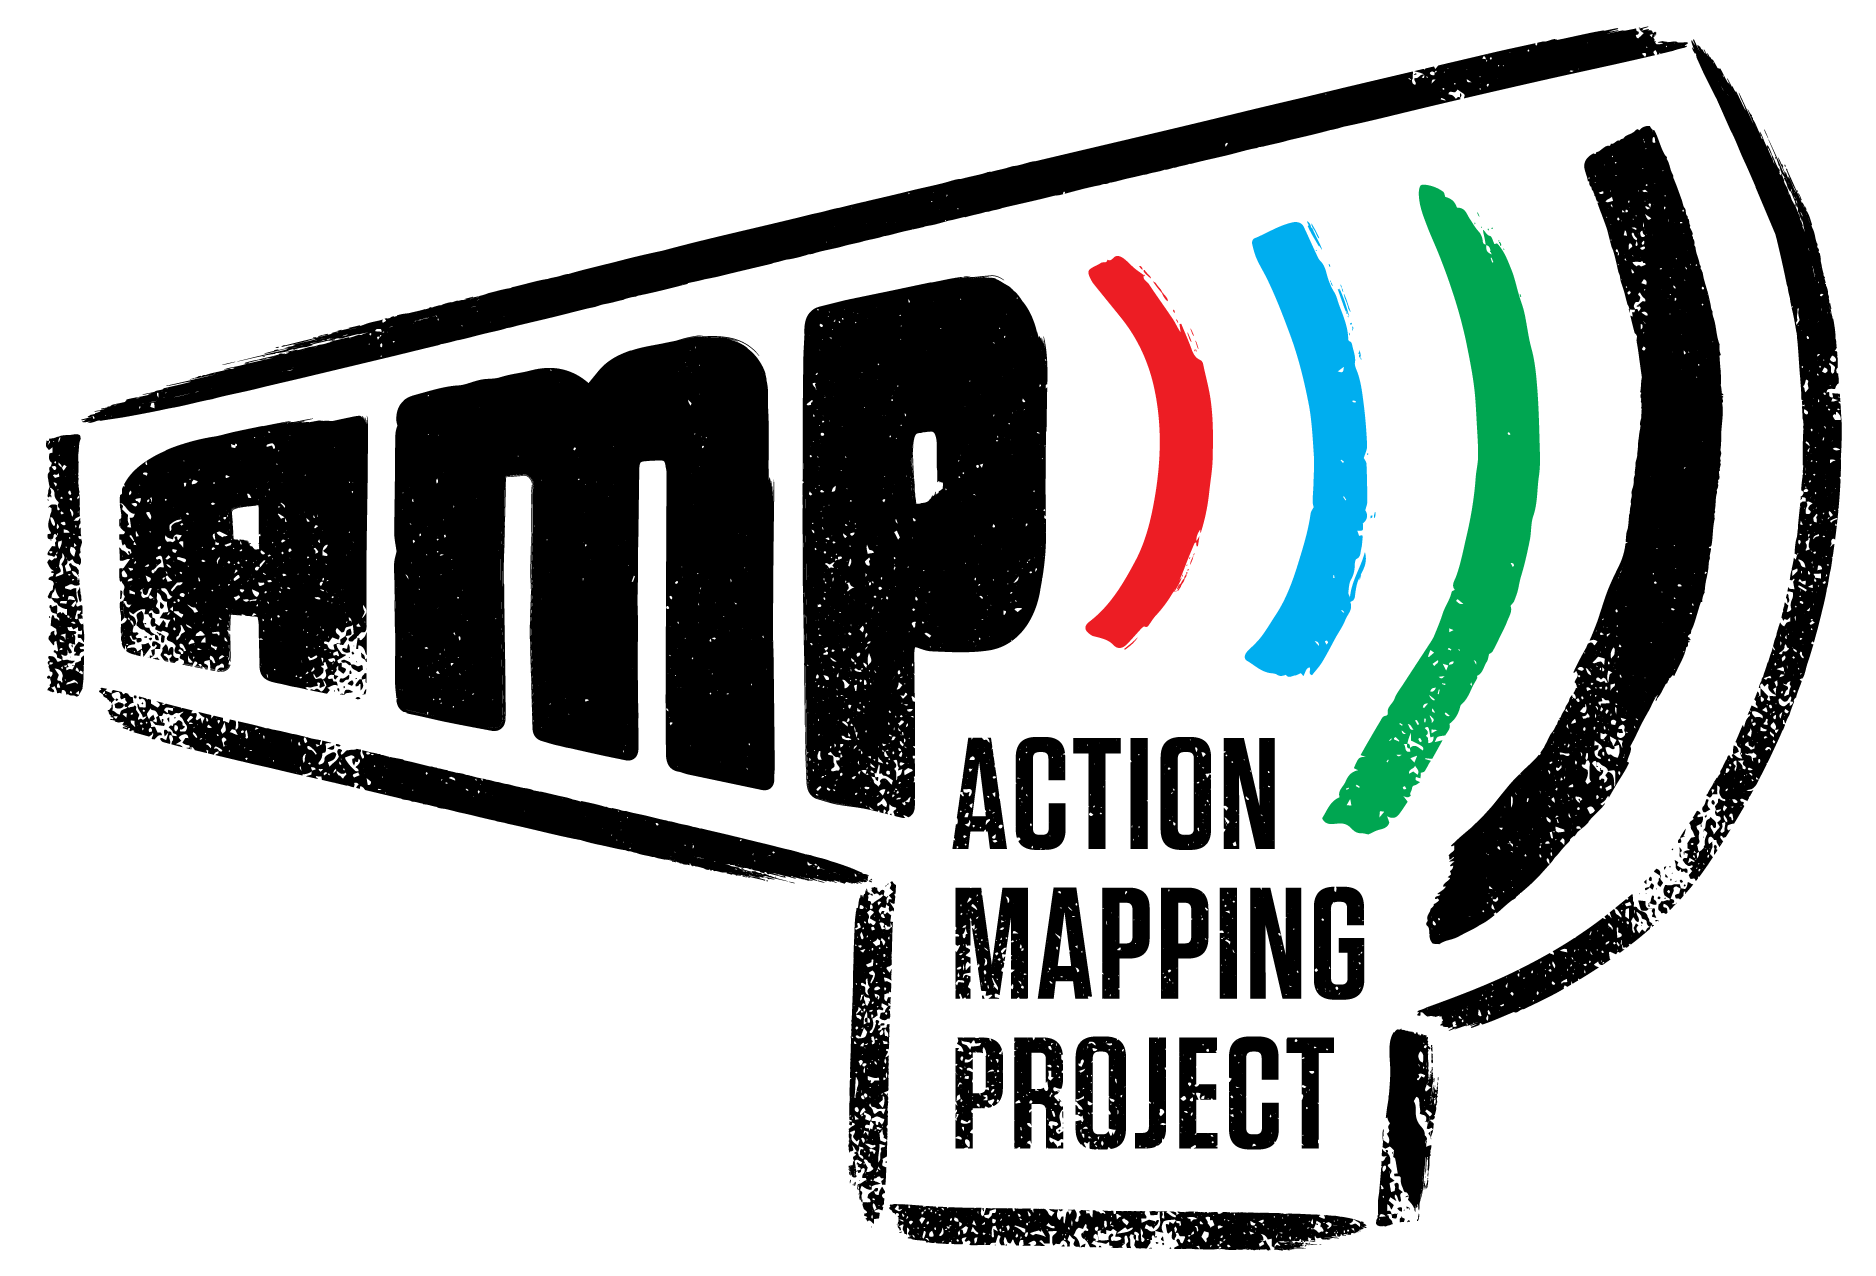 Action Mapping Project Logo